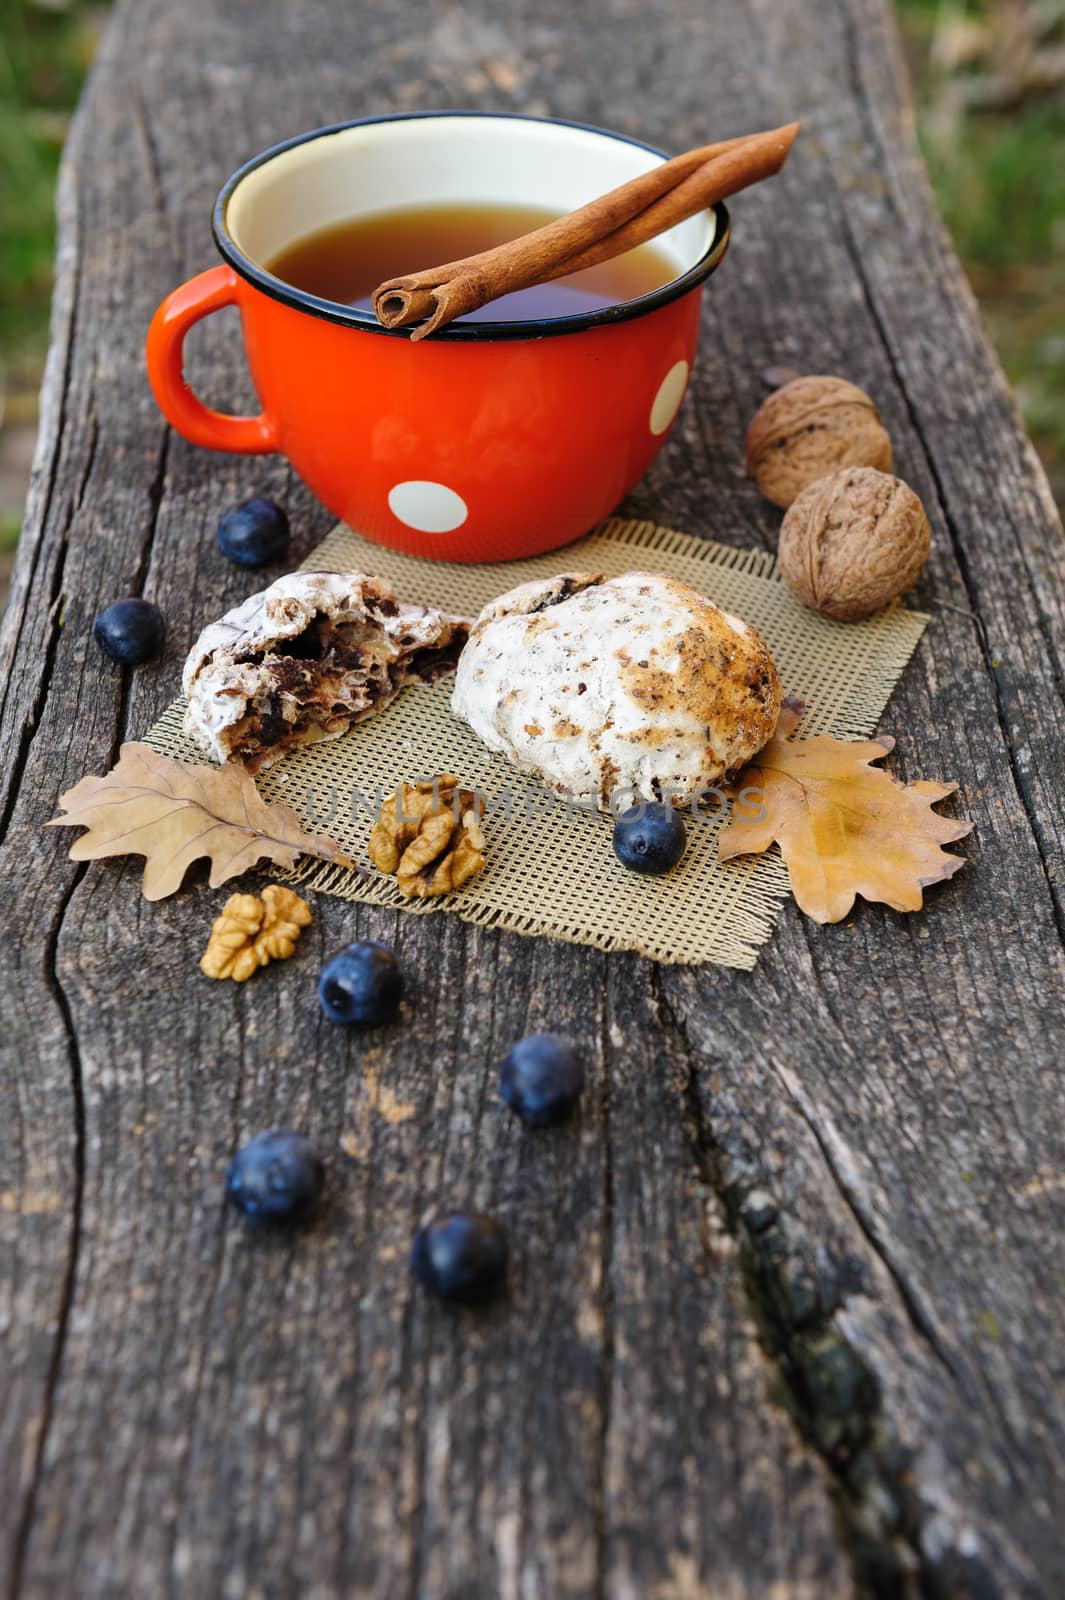 Romantic autumn still life with cookies, cup of tea, walnuts, blackthorn berries and oak leaves